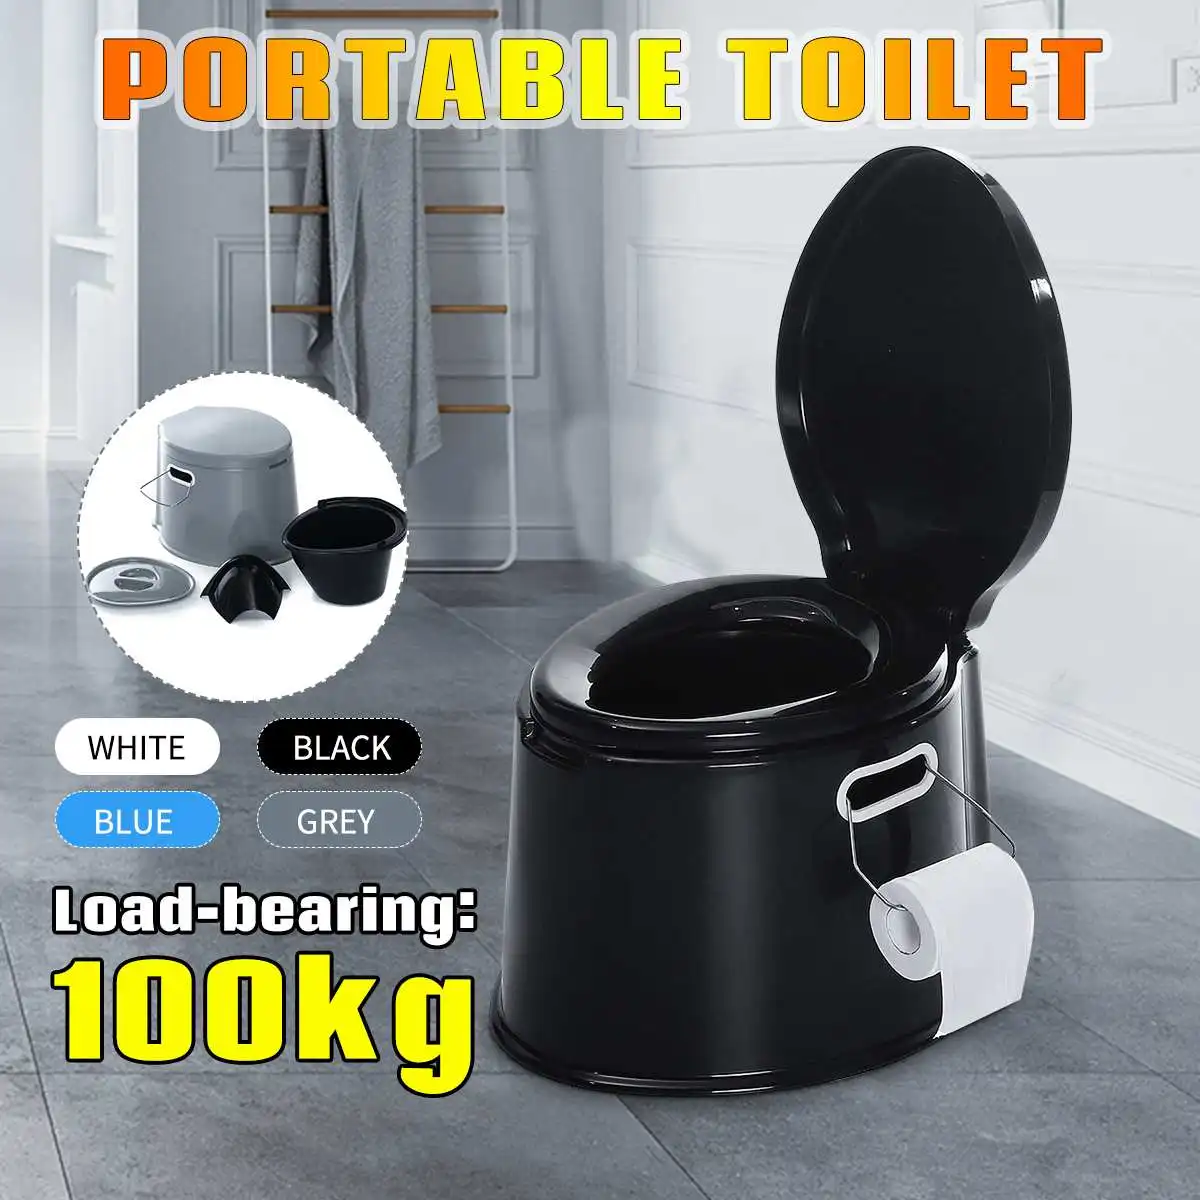 5L Portable Toilet Seat For Camping Toilet Travel Hiking Outdoor Indoor Potty US 